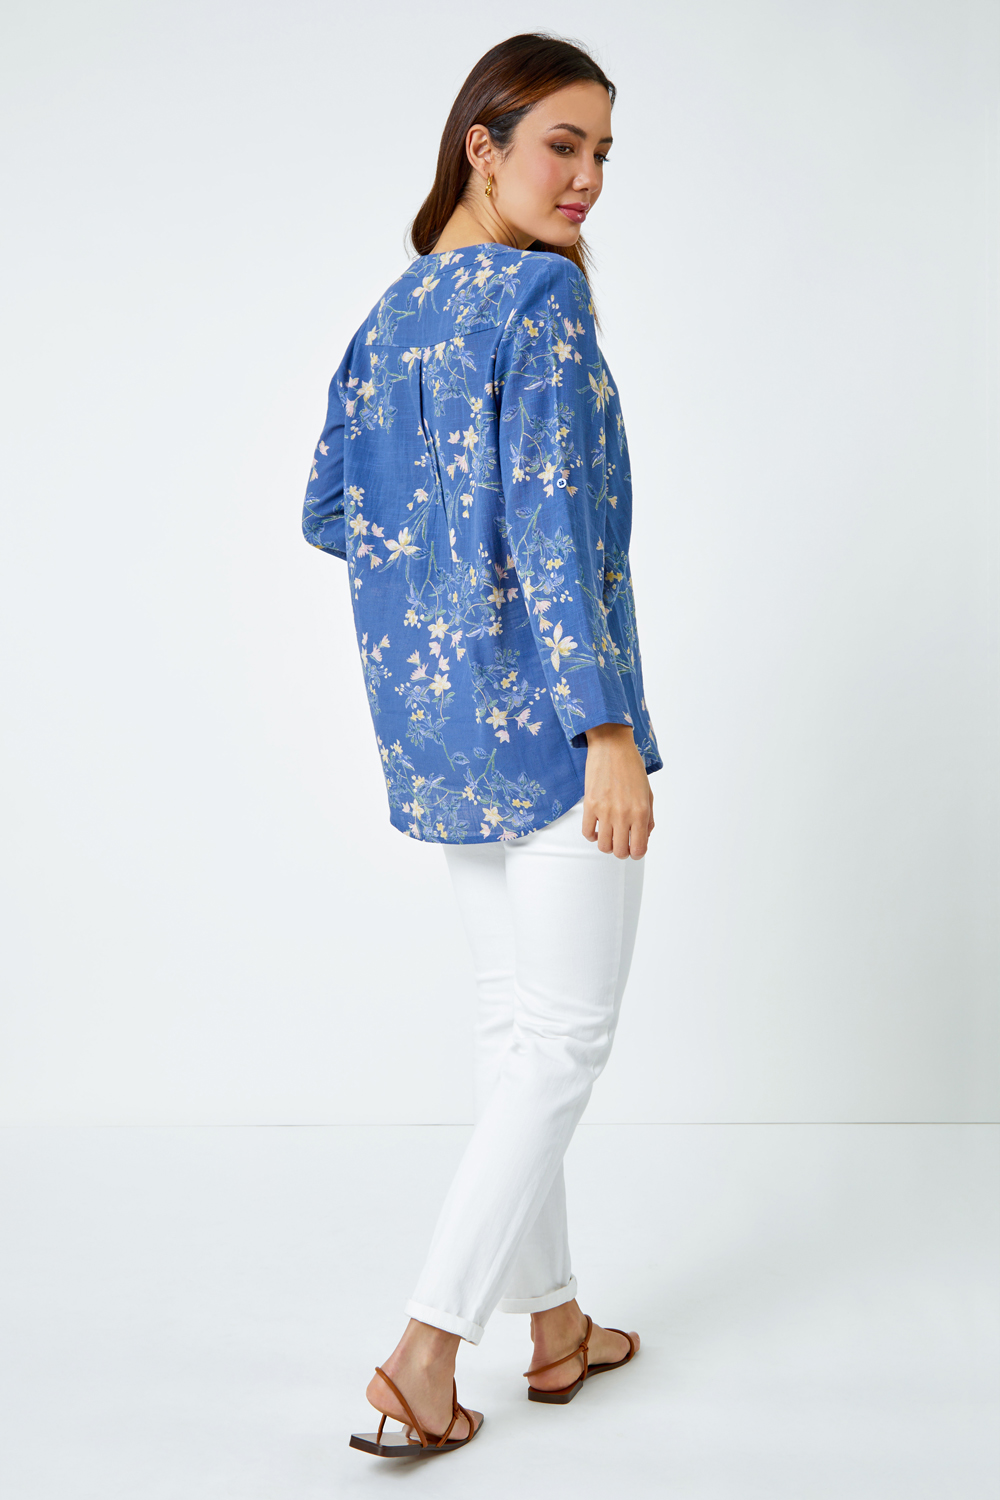 Blue Cotton Floral Print Overshirt, Image 3 of 5